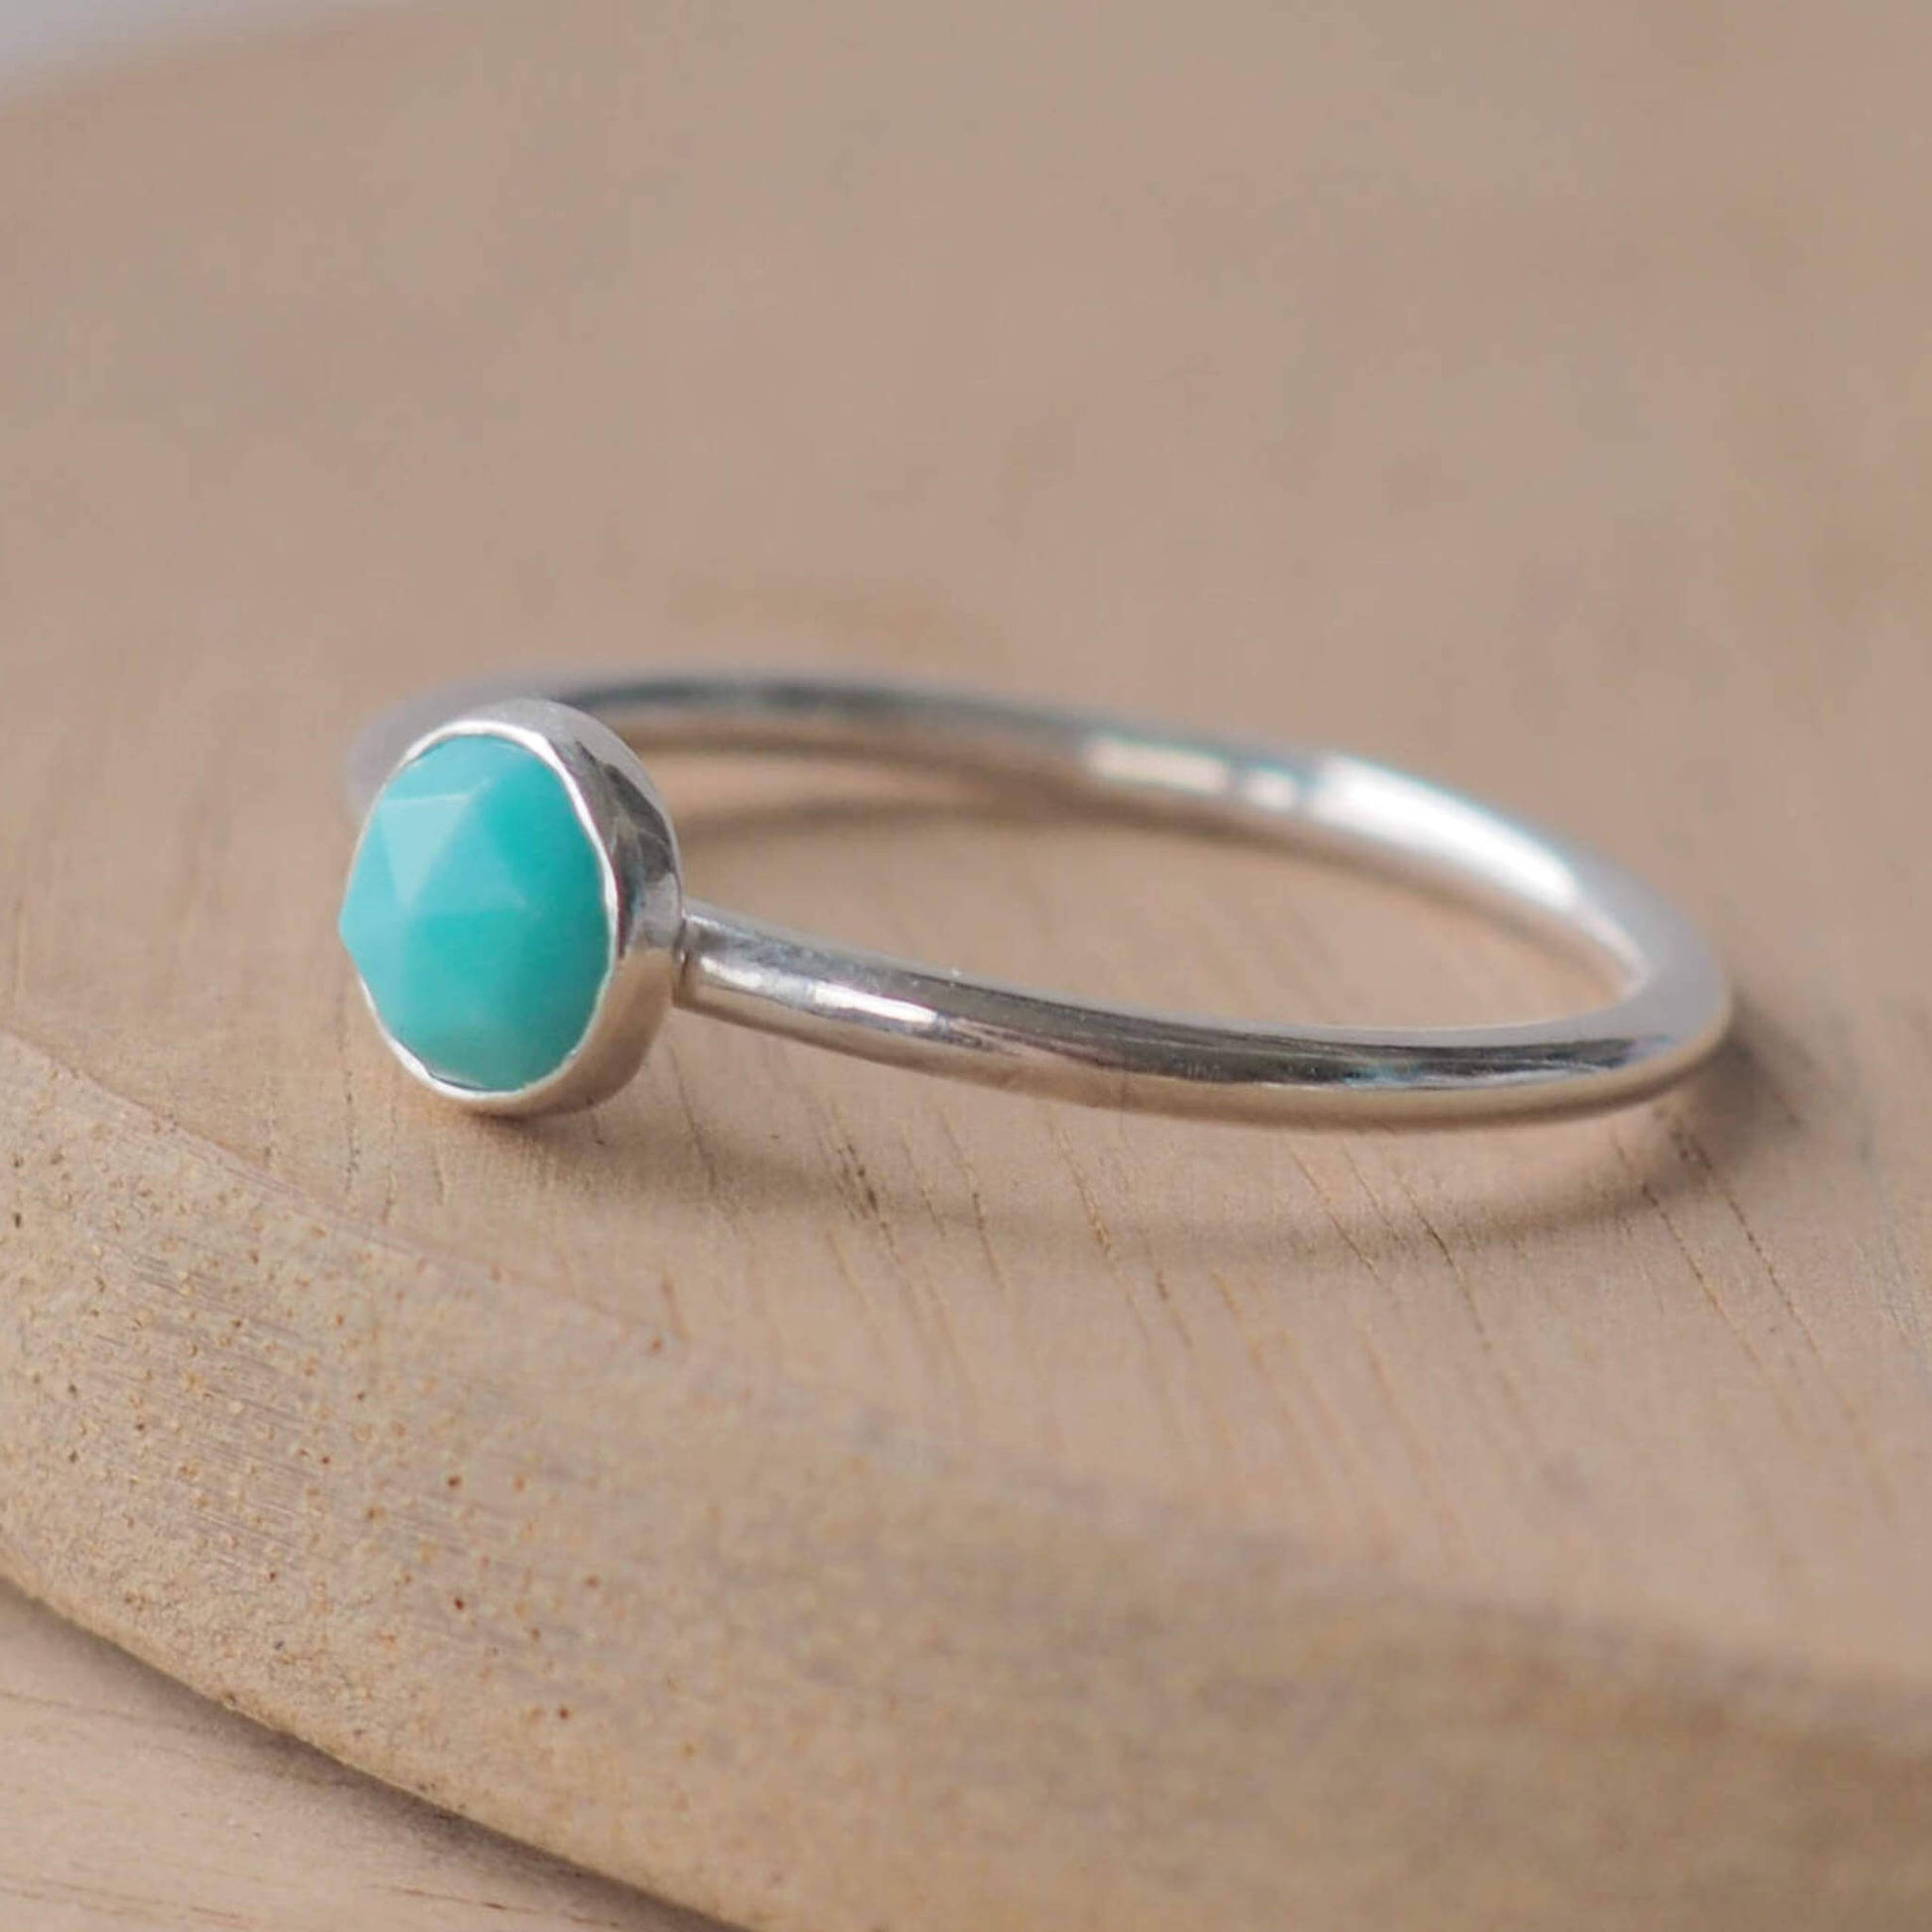 silver and turquoise simple silver ring. Handmade in Scotland by maram jewellery